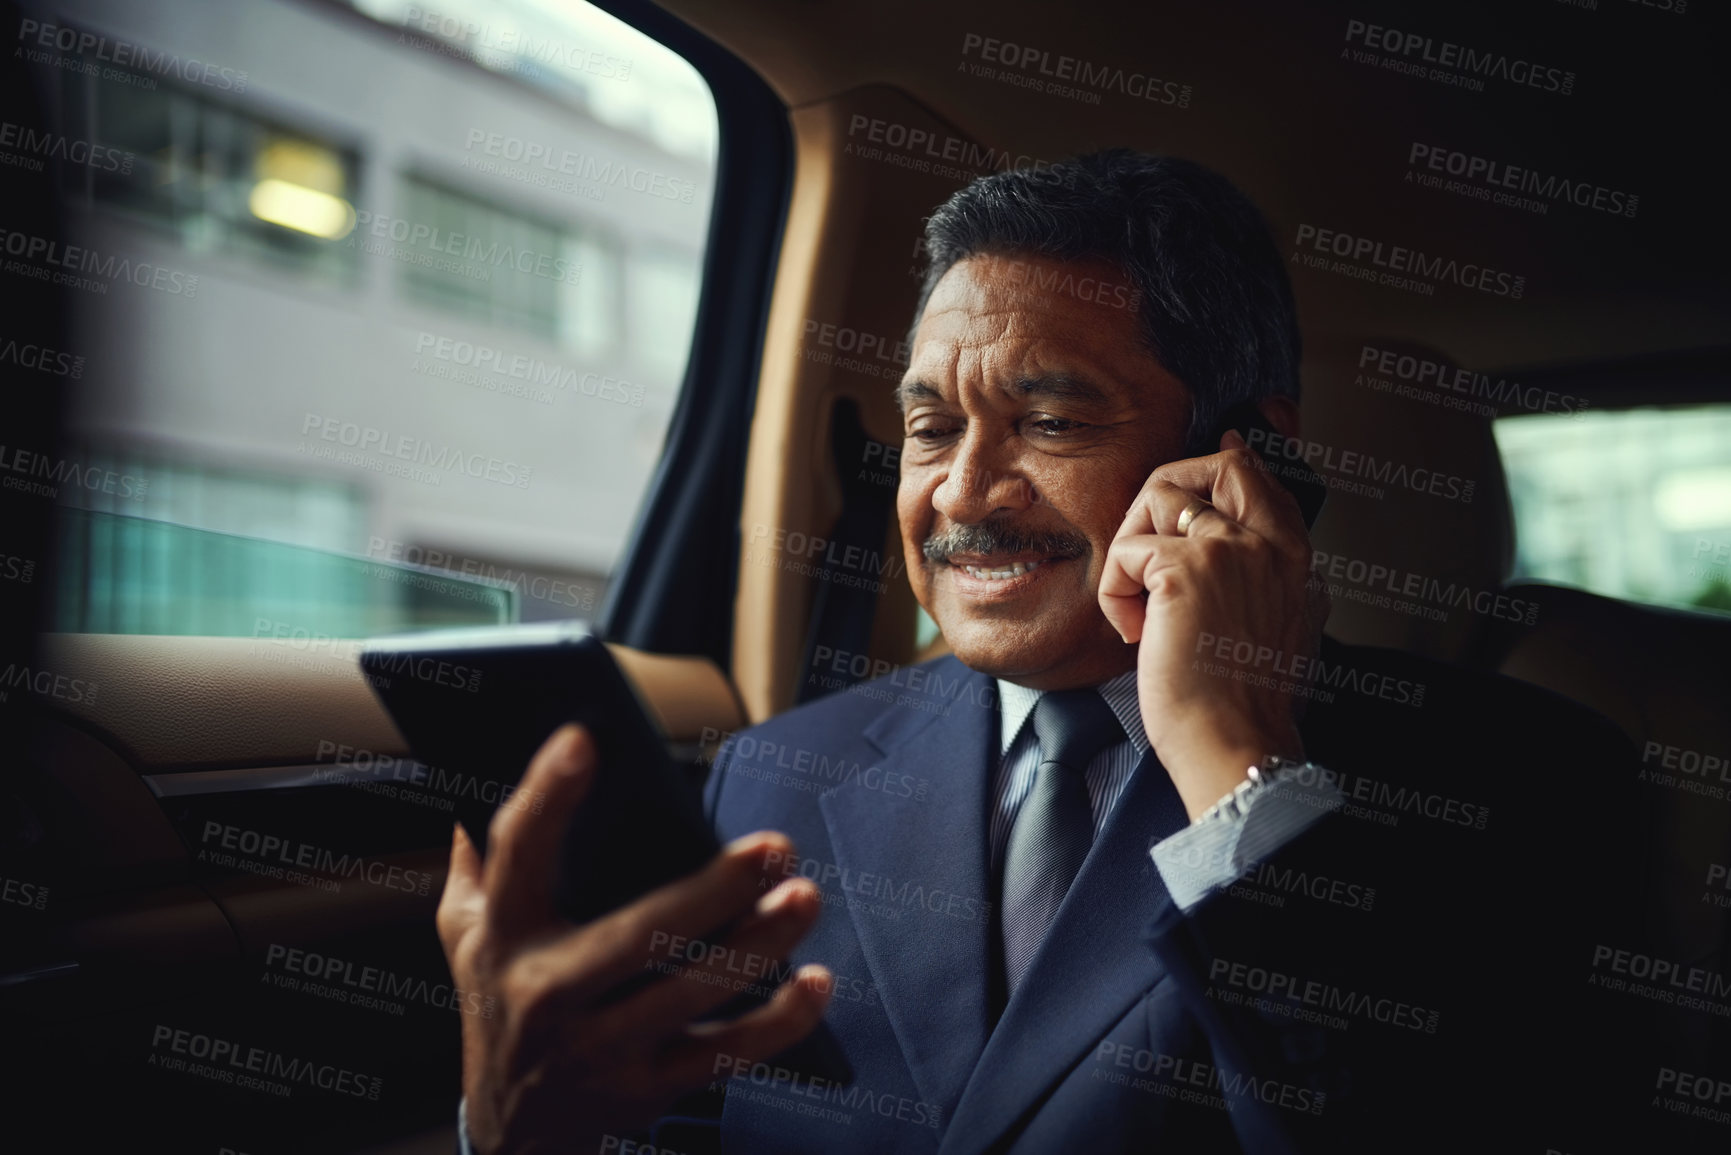 Buy stock photo Shot of a mature businessman using a phone and digital while traveling in a car